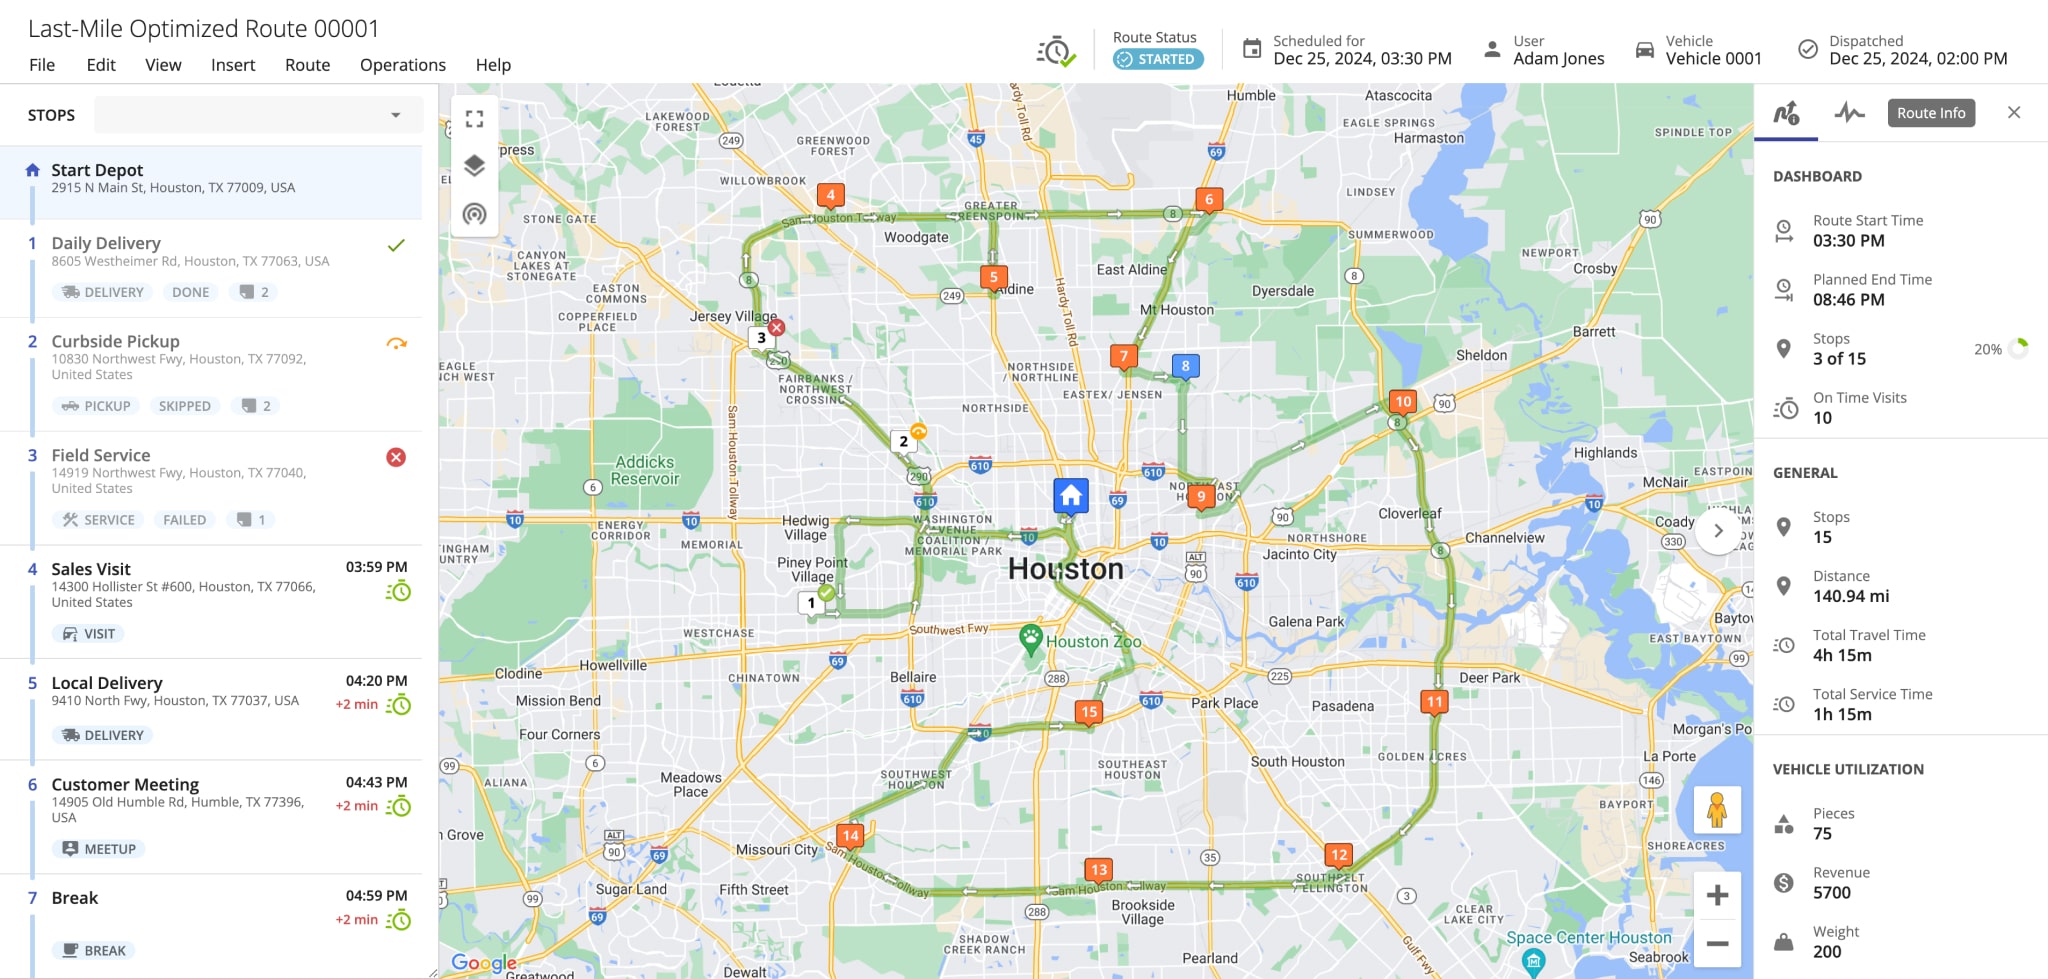 Open, view, and manage planned last-mile routes, track stop and route statuses, route progress, and drivers in real-time using Route4Me's Route Editor.